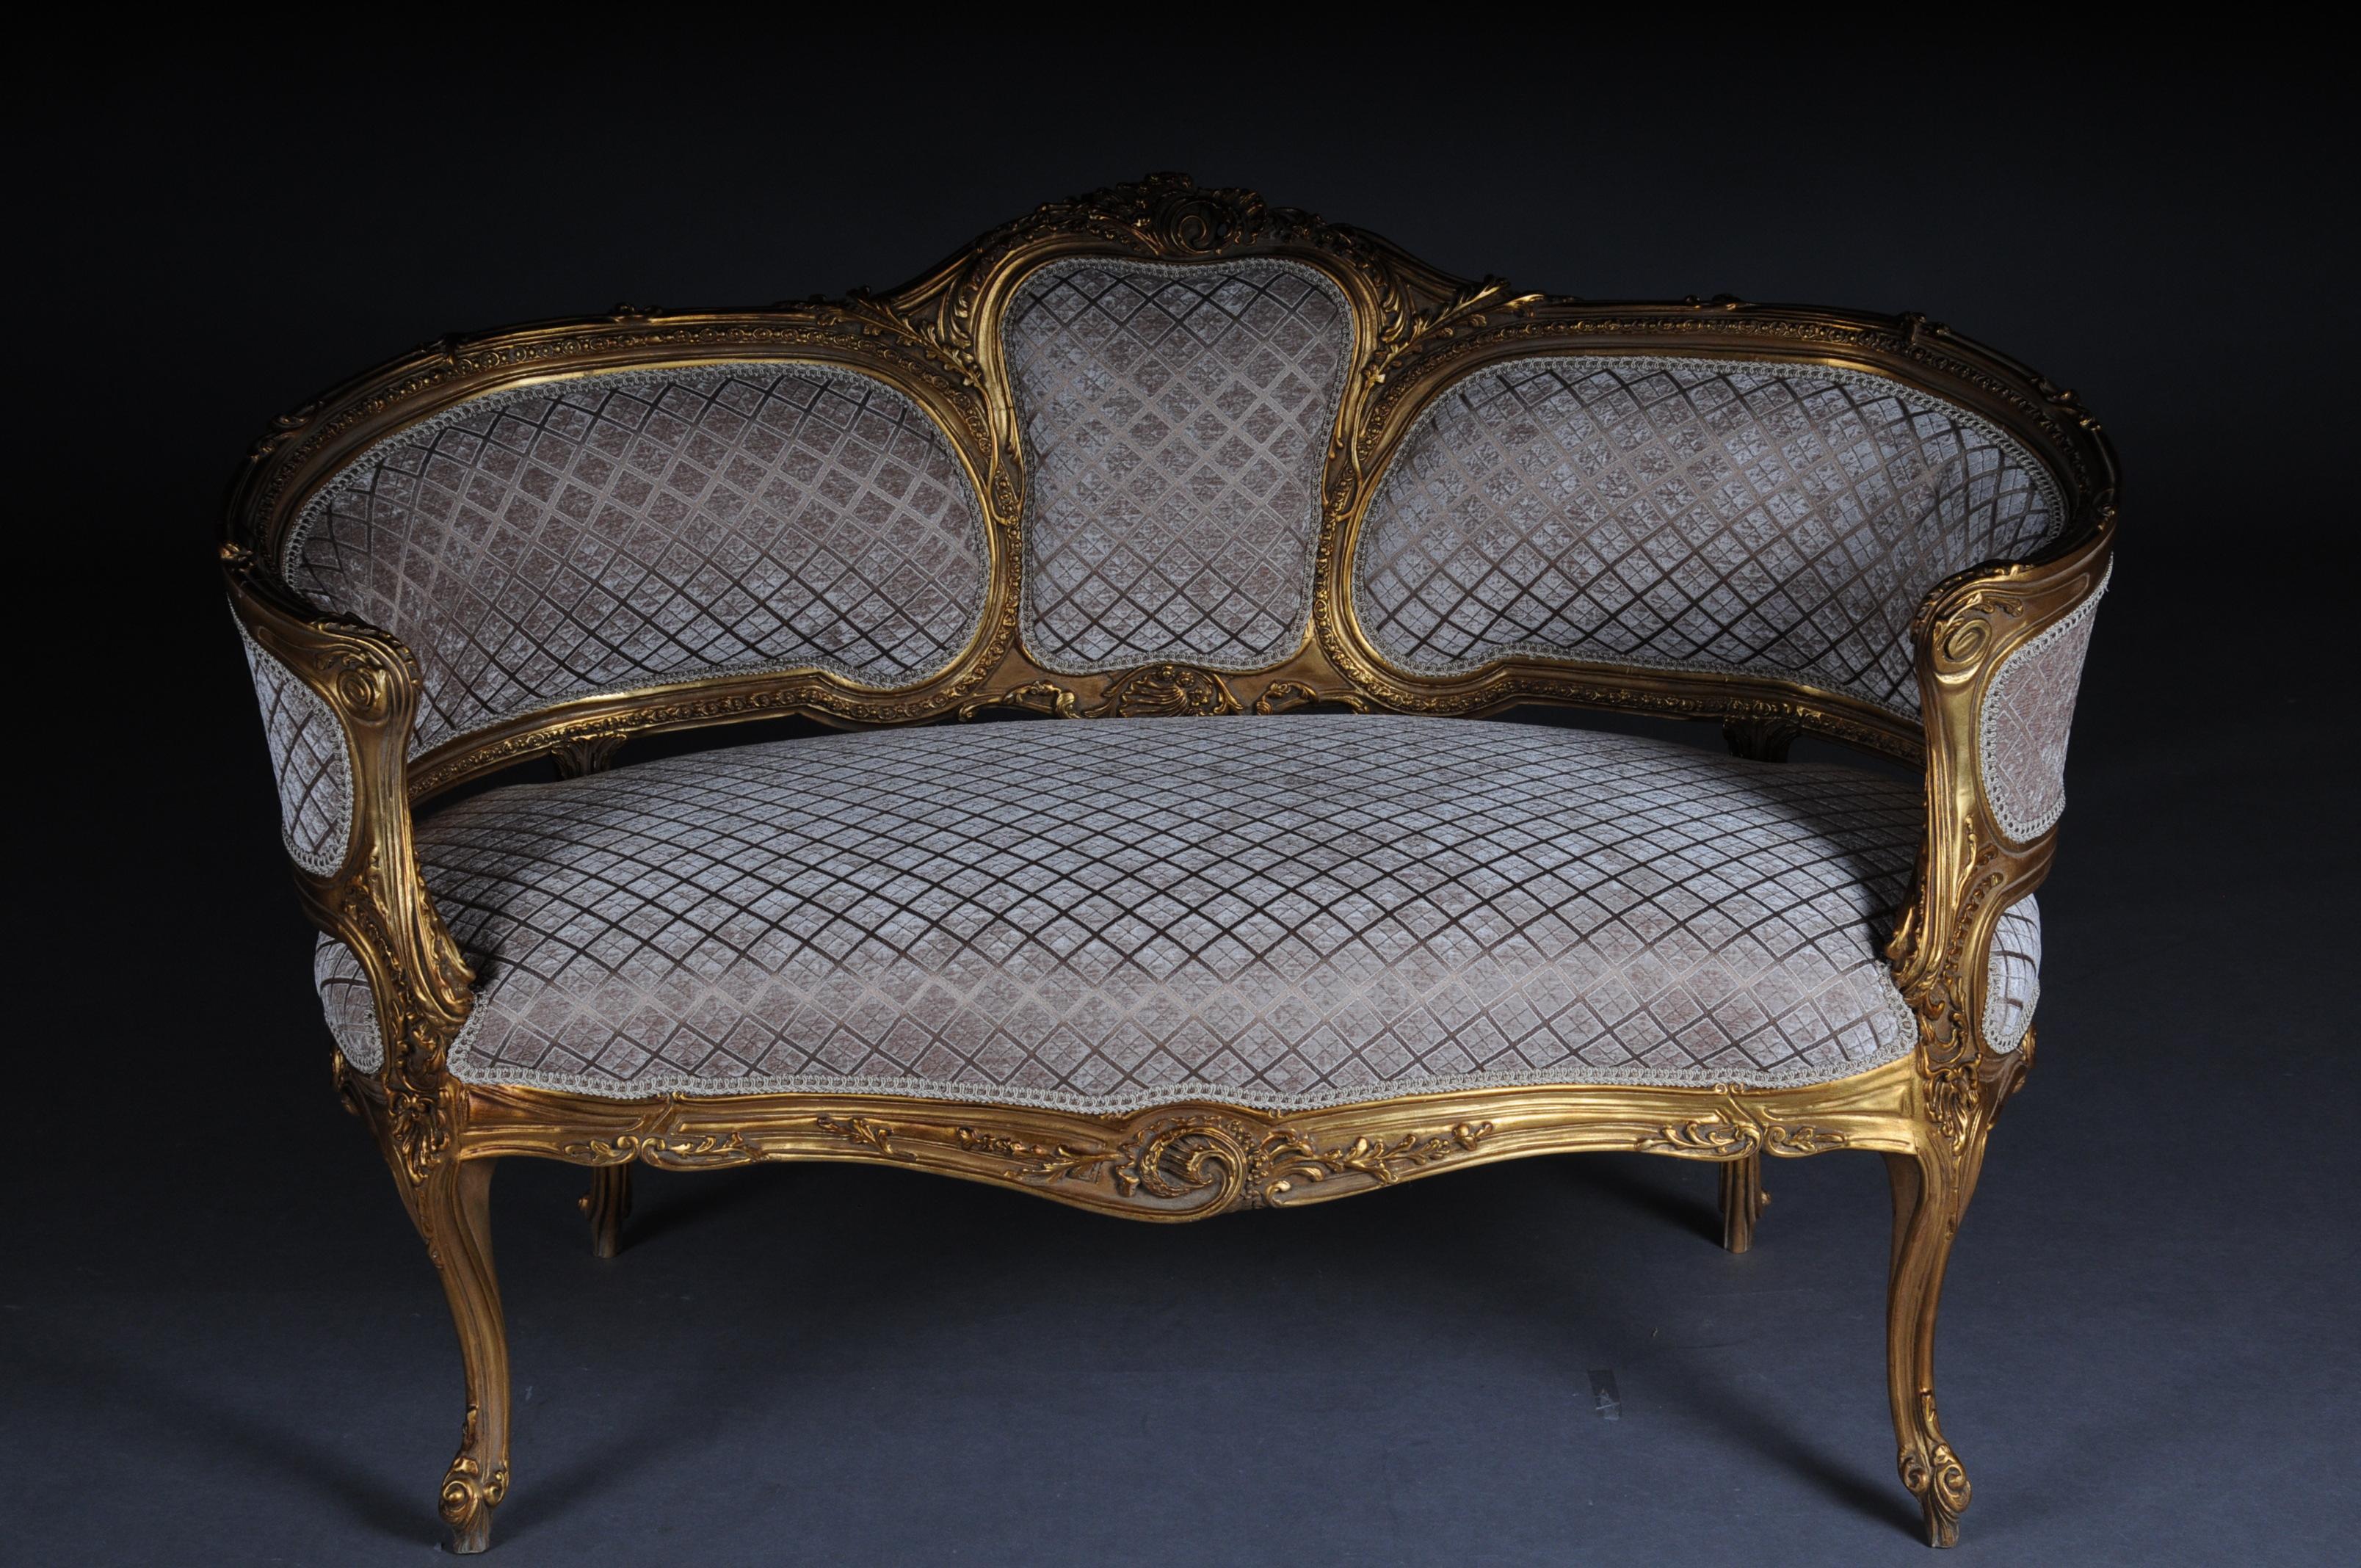 Luxurious sofa, canapé, couch in Rococo or Louis XV style.

Solid beech wood, carved and gilded. Rising backrest framing with openwork rocaille crowning. Appropriately curved frame with richly carved foliage. Slightly curved frame on straight